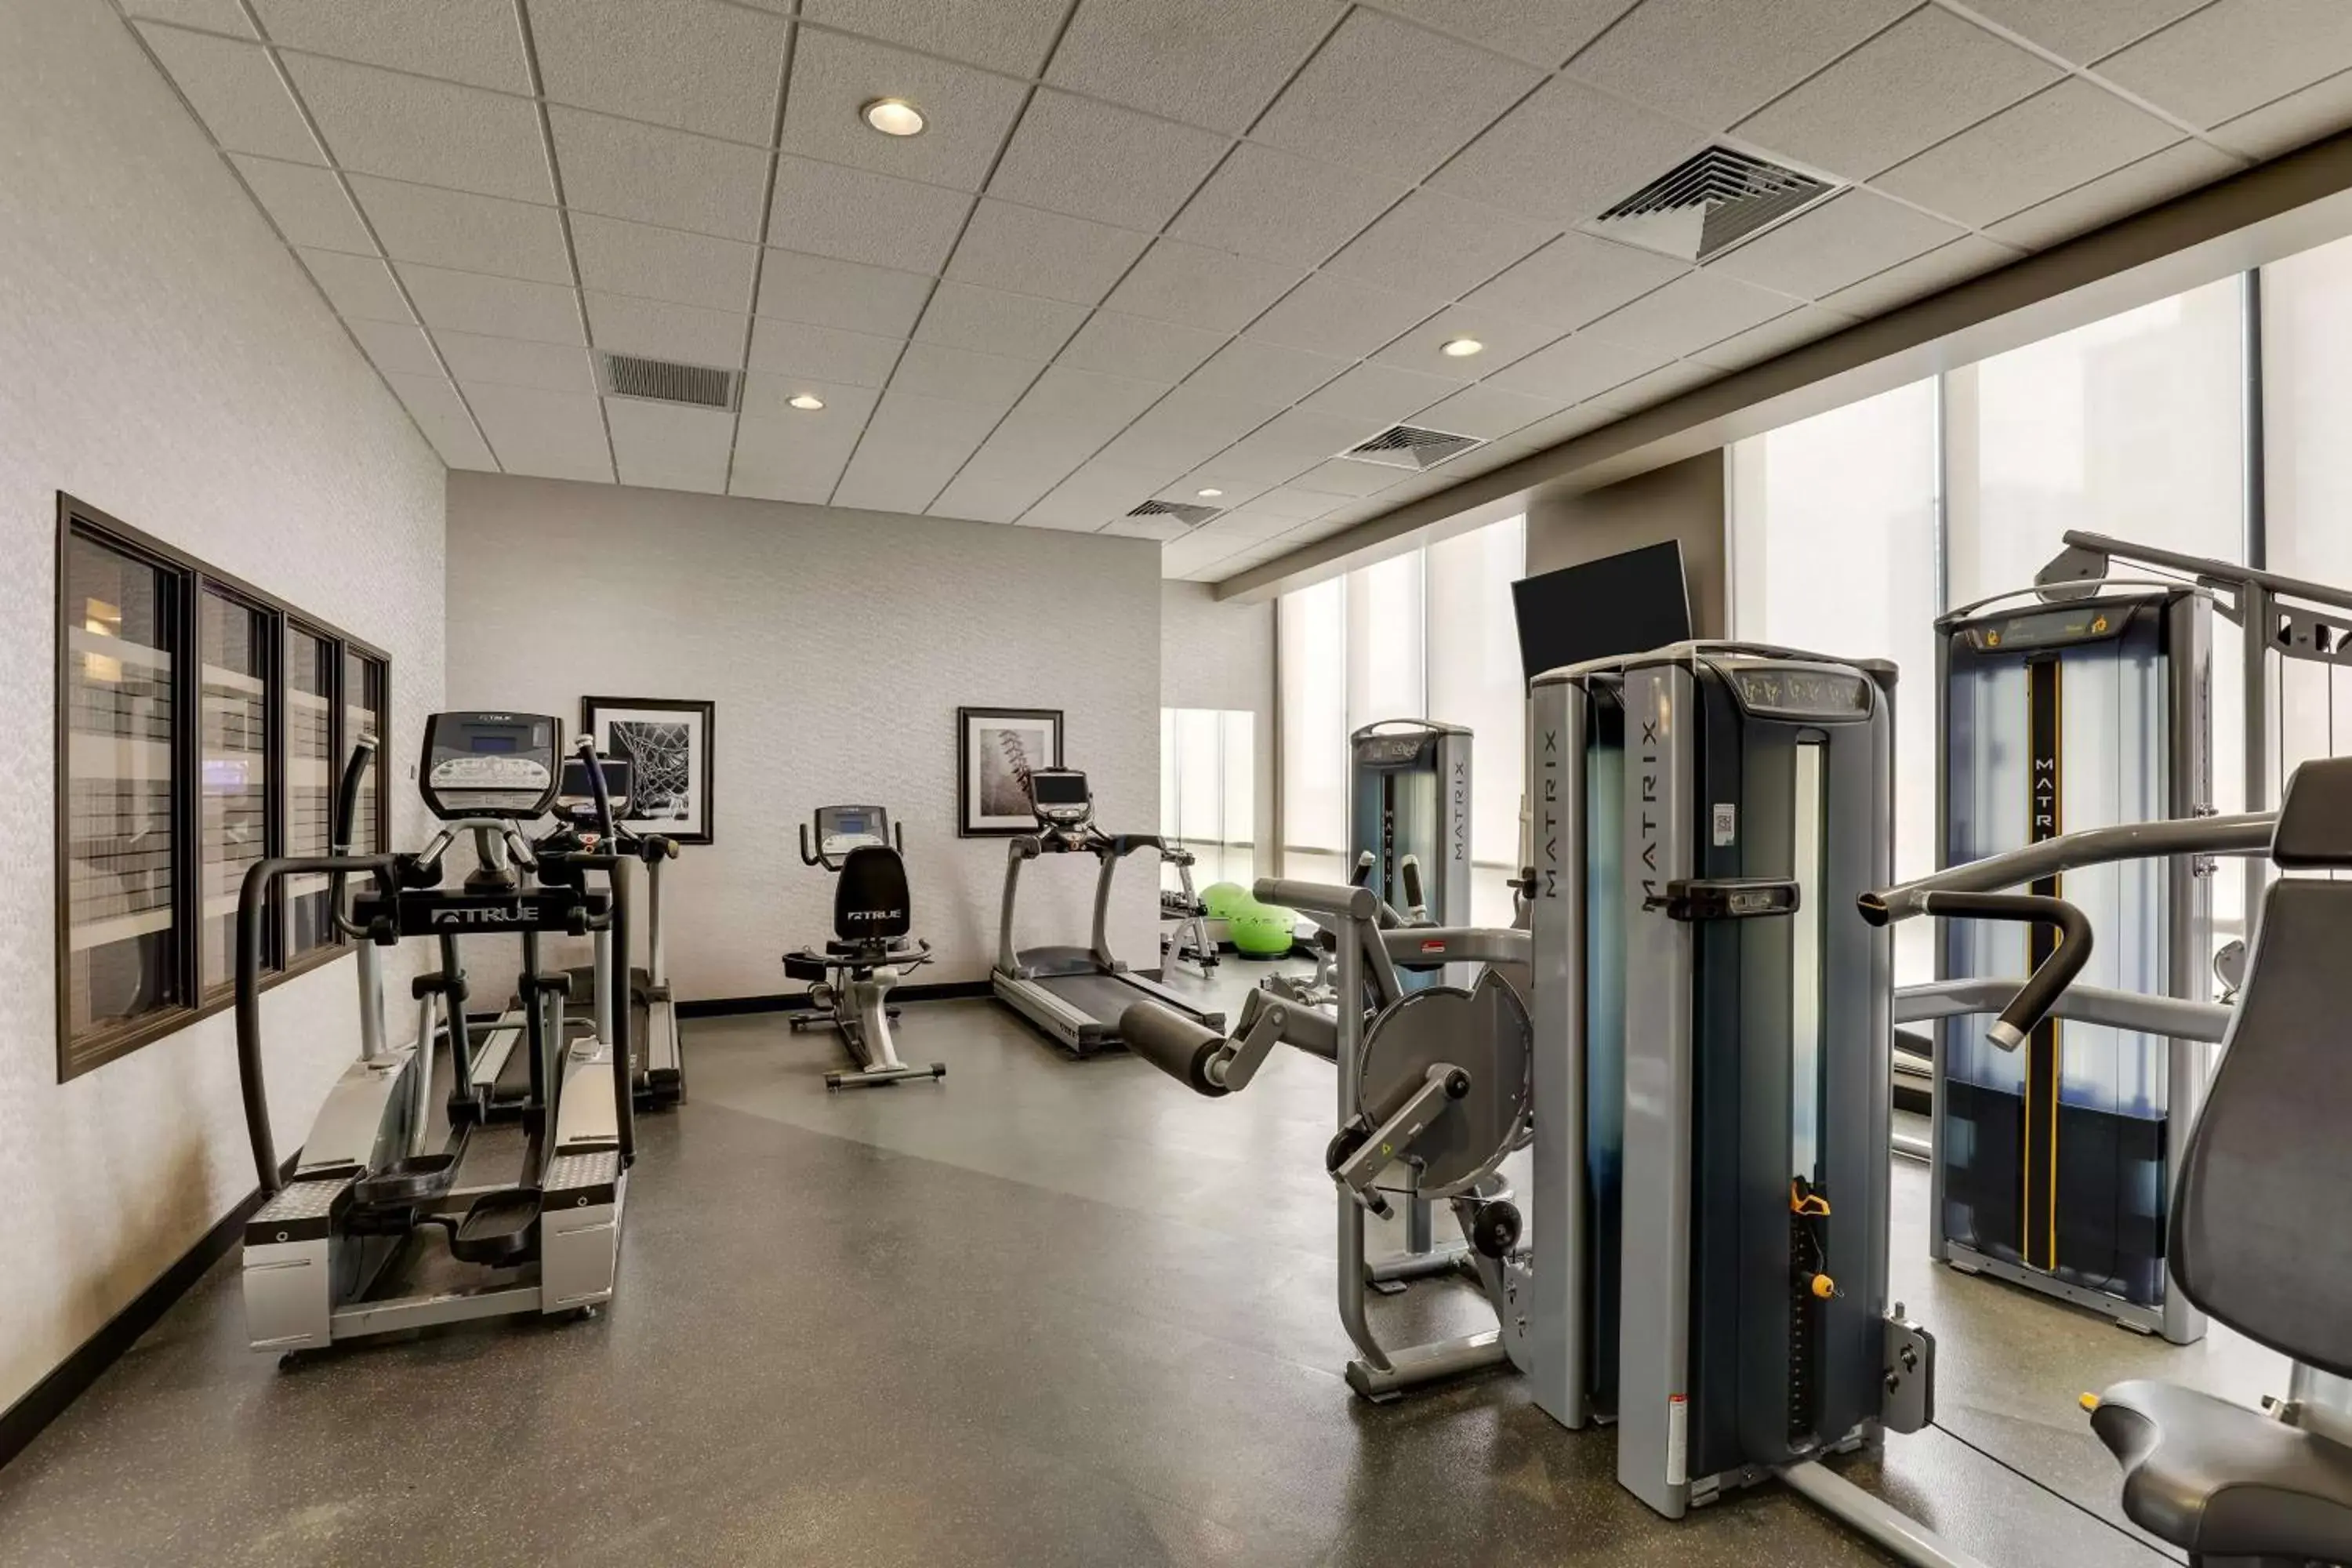 Fitness centre/facilities, Fitness Center/Facilities in Drury Plaza Hotel New Orleans